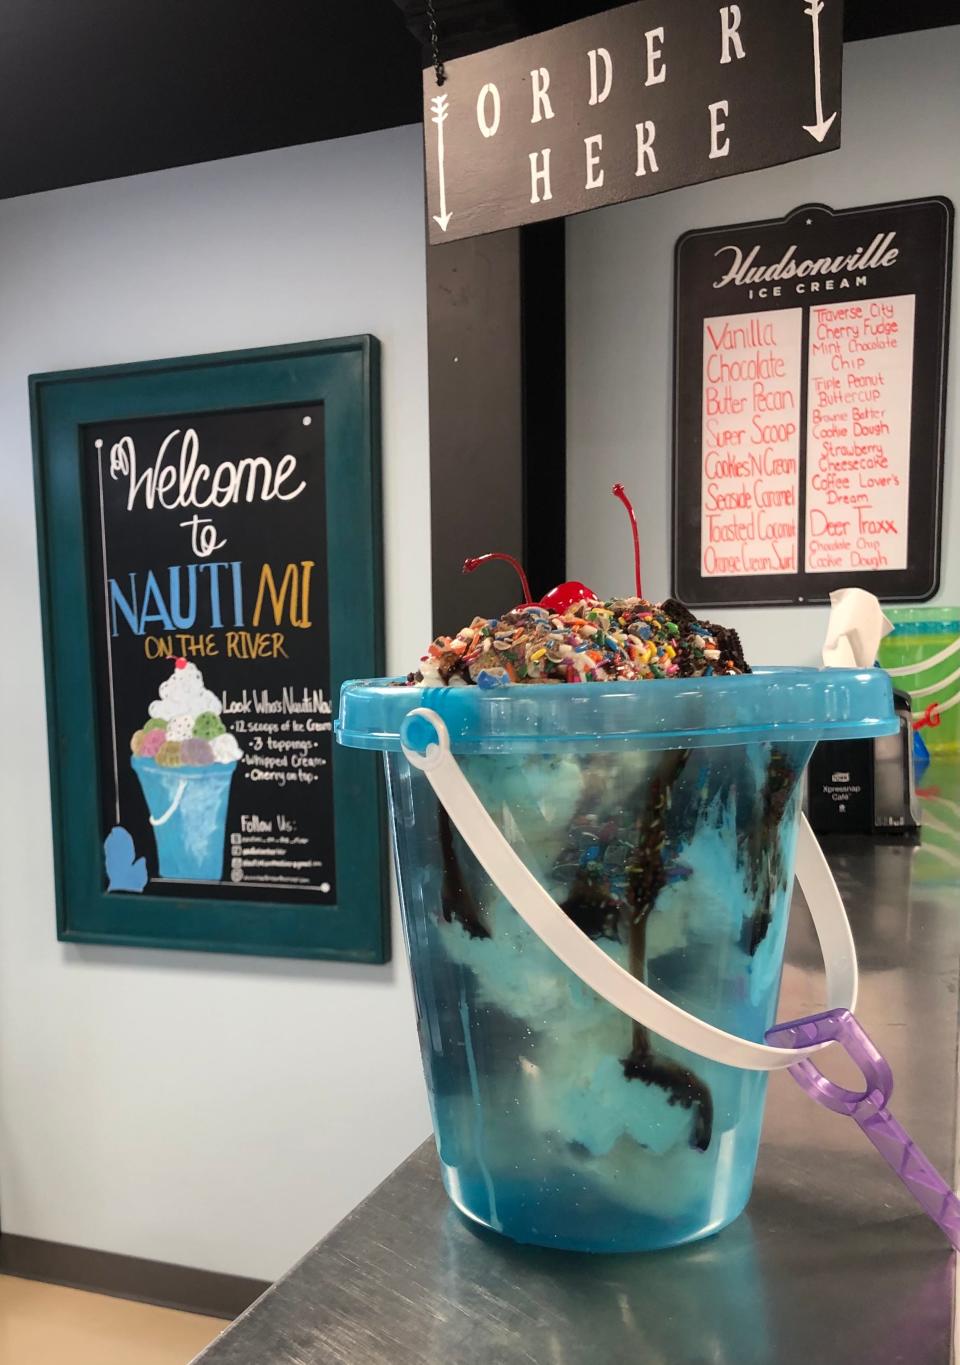 The "Look Who's Nauti Now" sundae at NautiMI on the River includes 12 scoops of ice cream, three toppings, whipped cream and cherries inside a sandcastle pail.